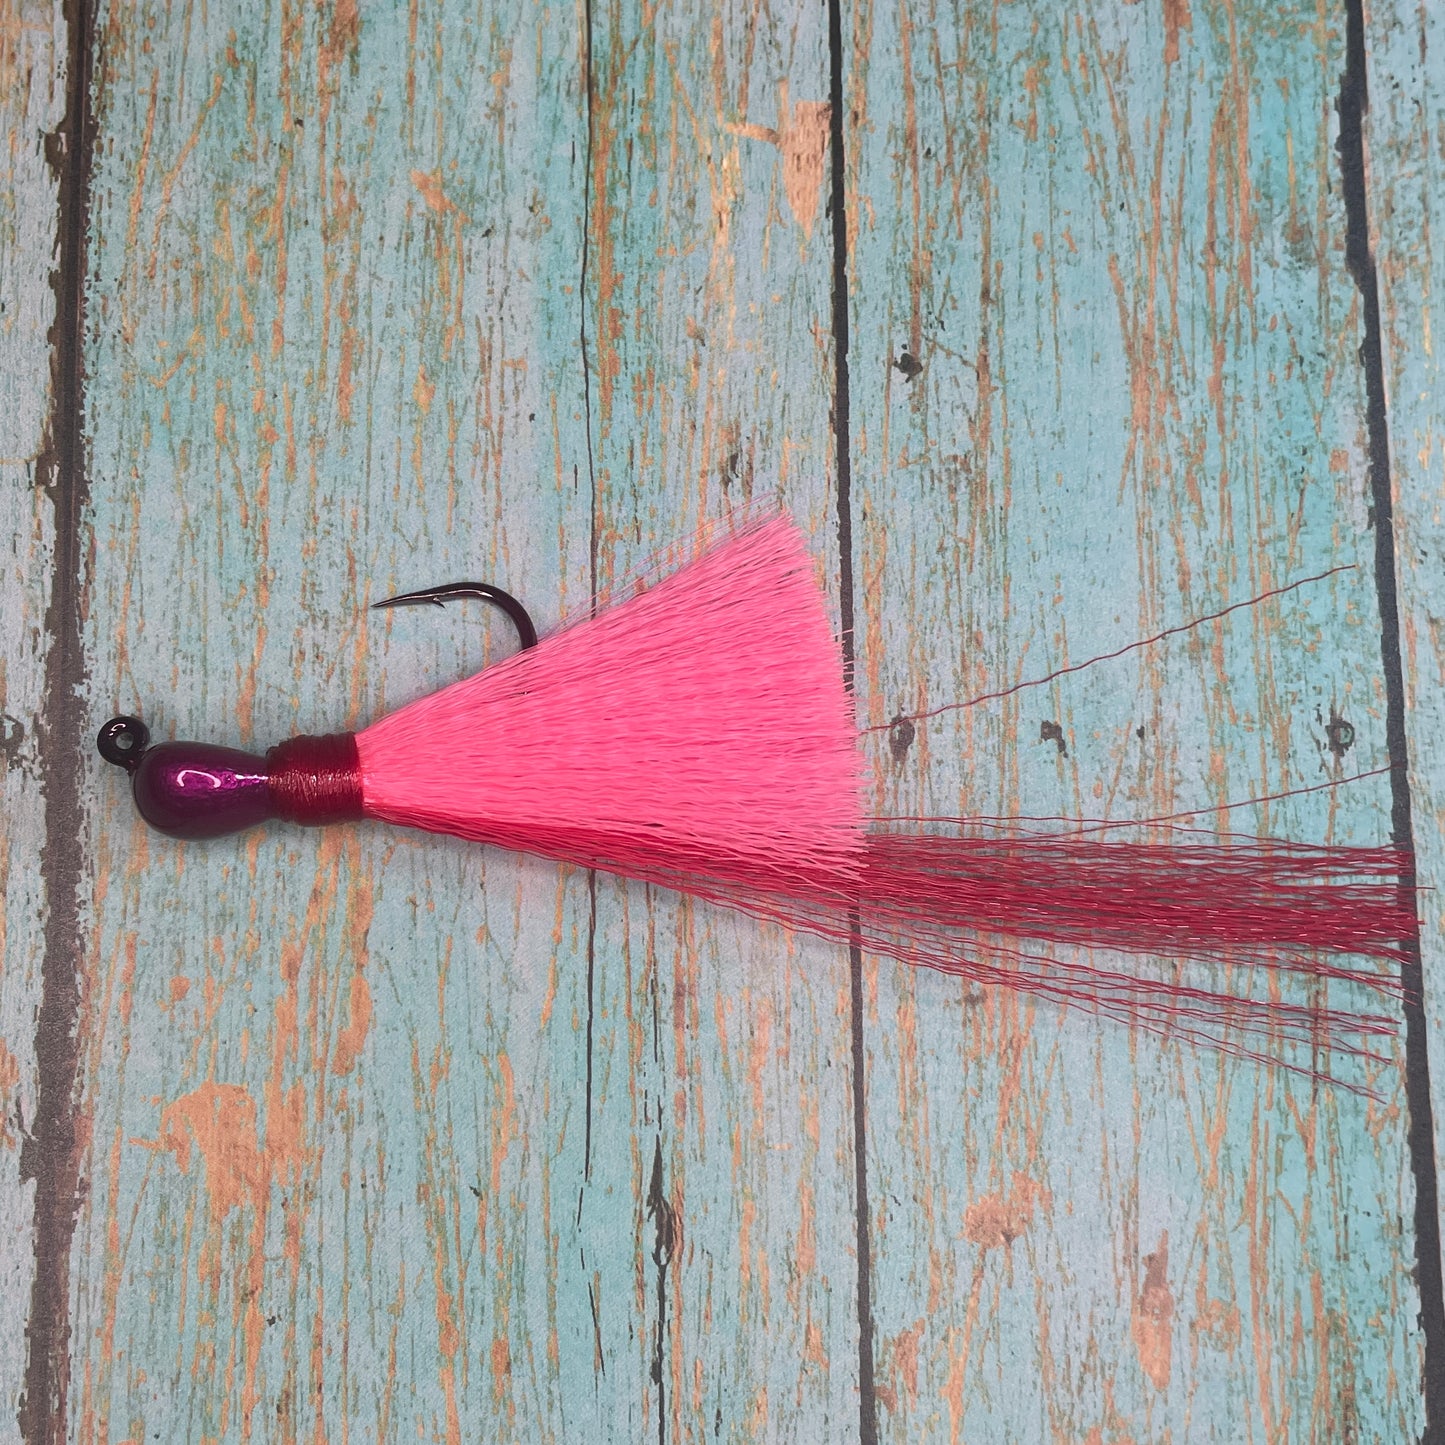 Mini Flare Hawk Jig. Peacock and Snook Candy